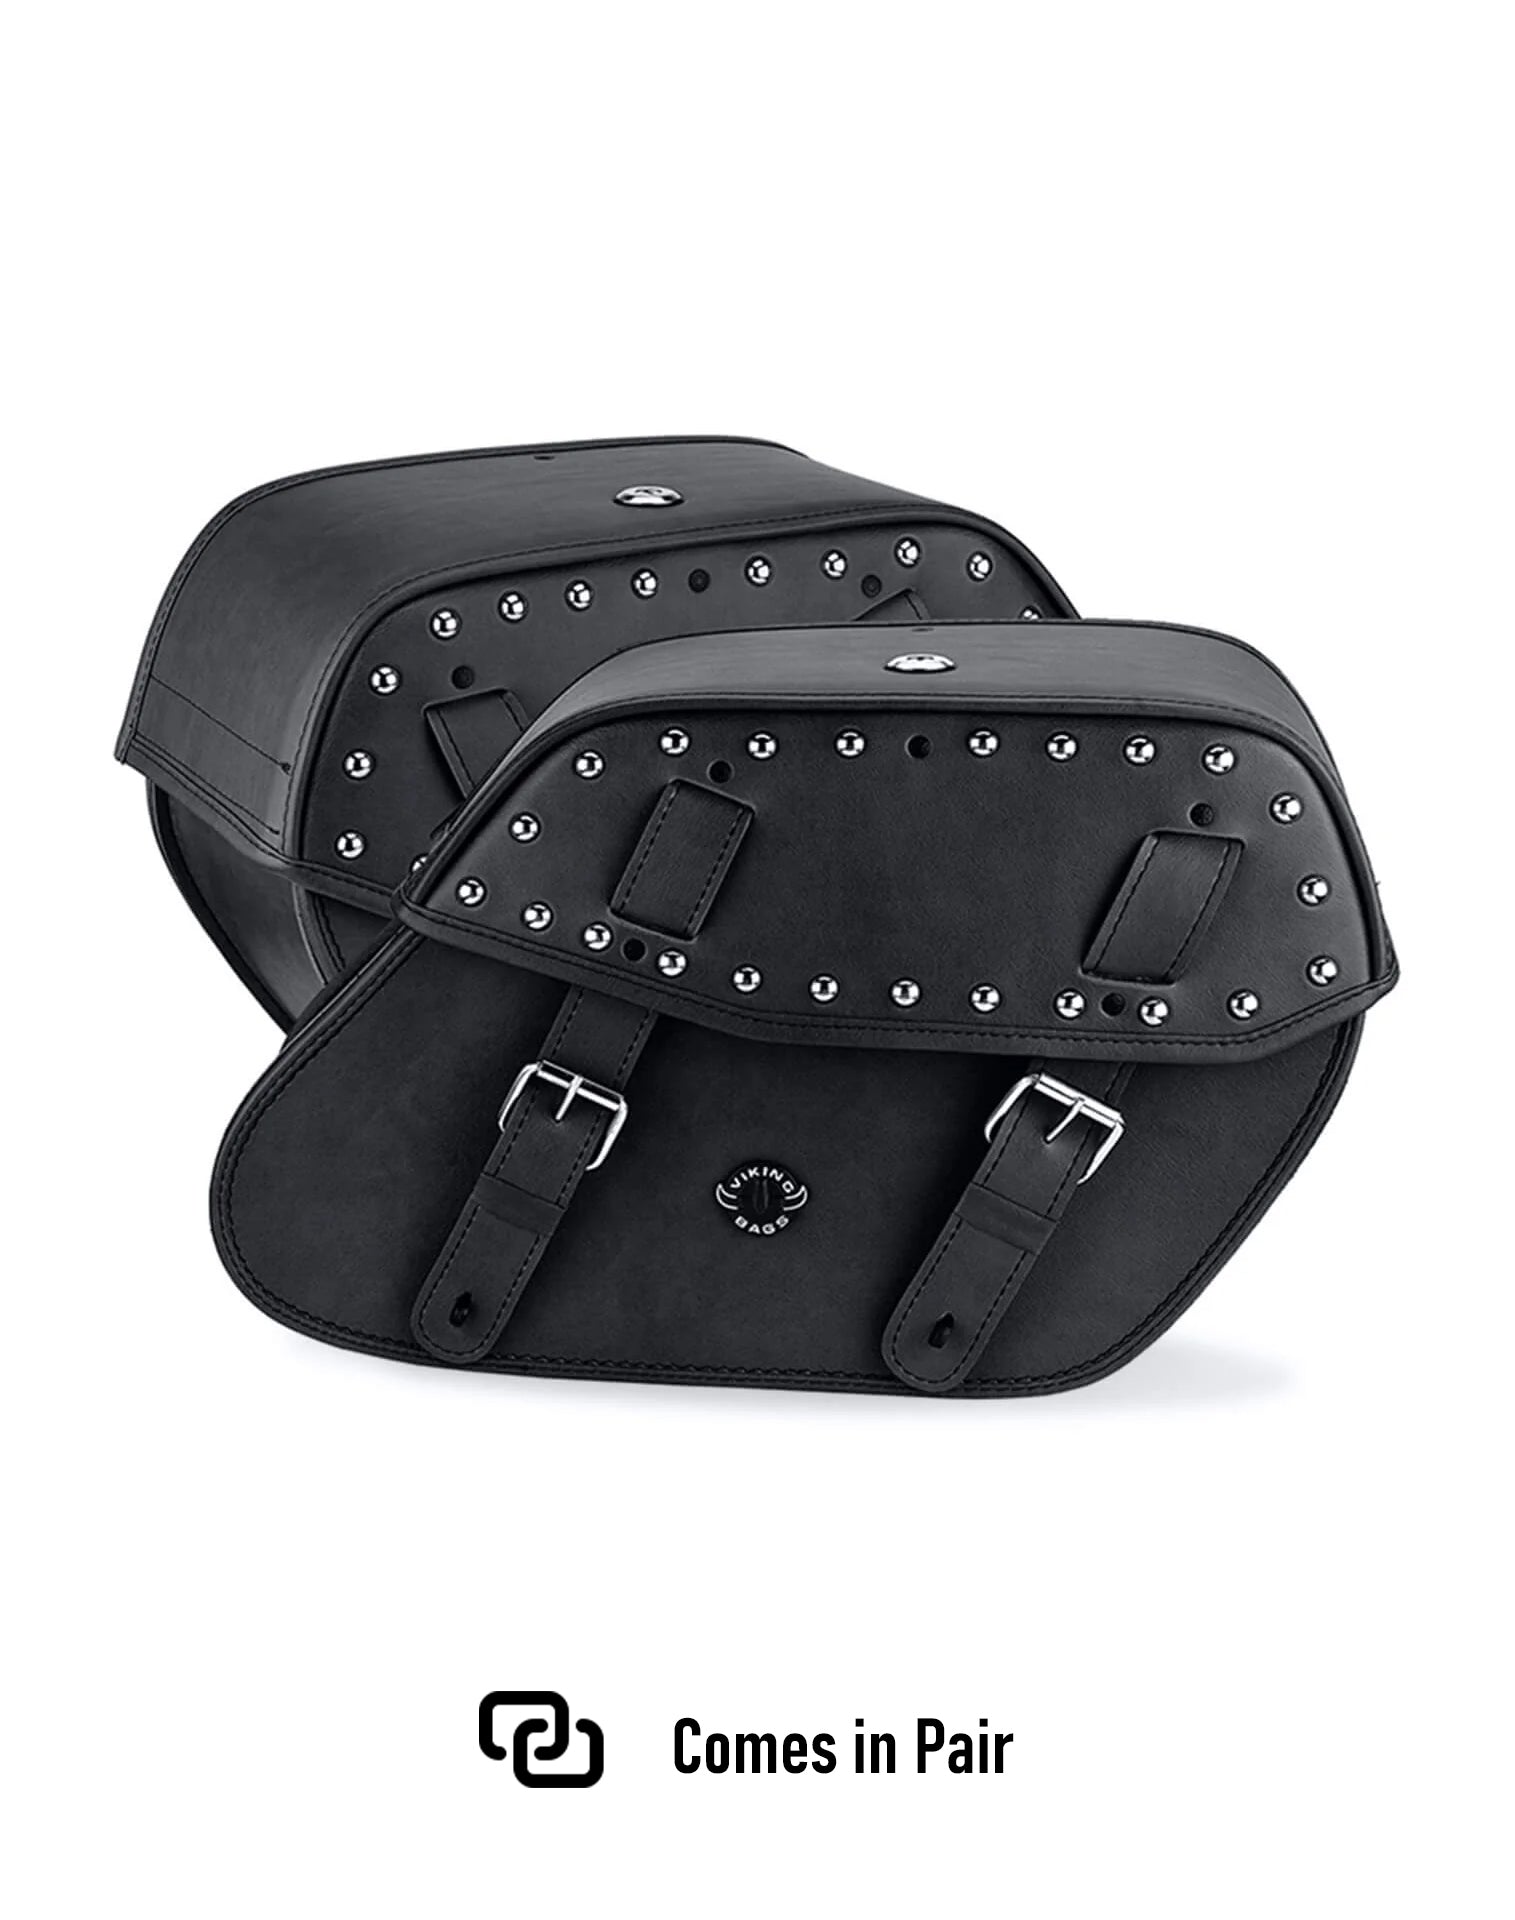 Viking Odin Large Yamaha V Star 950 Tourer Studded Leather Motorcycle Saddlebags Weather Resistant Bags Comes in Pair